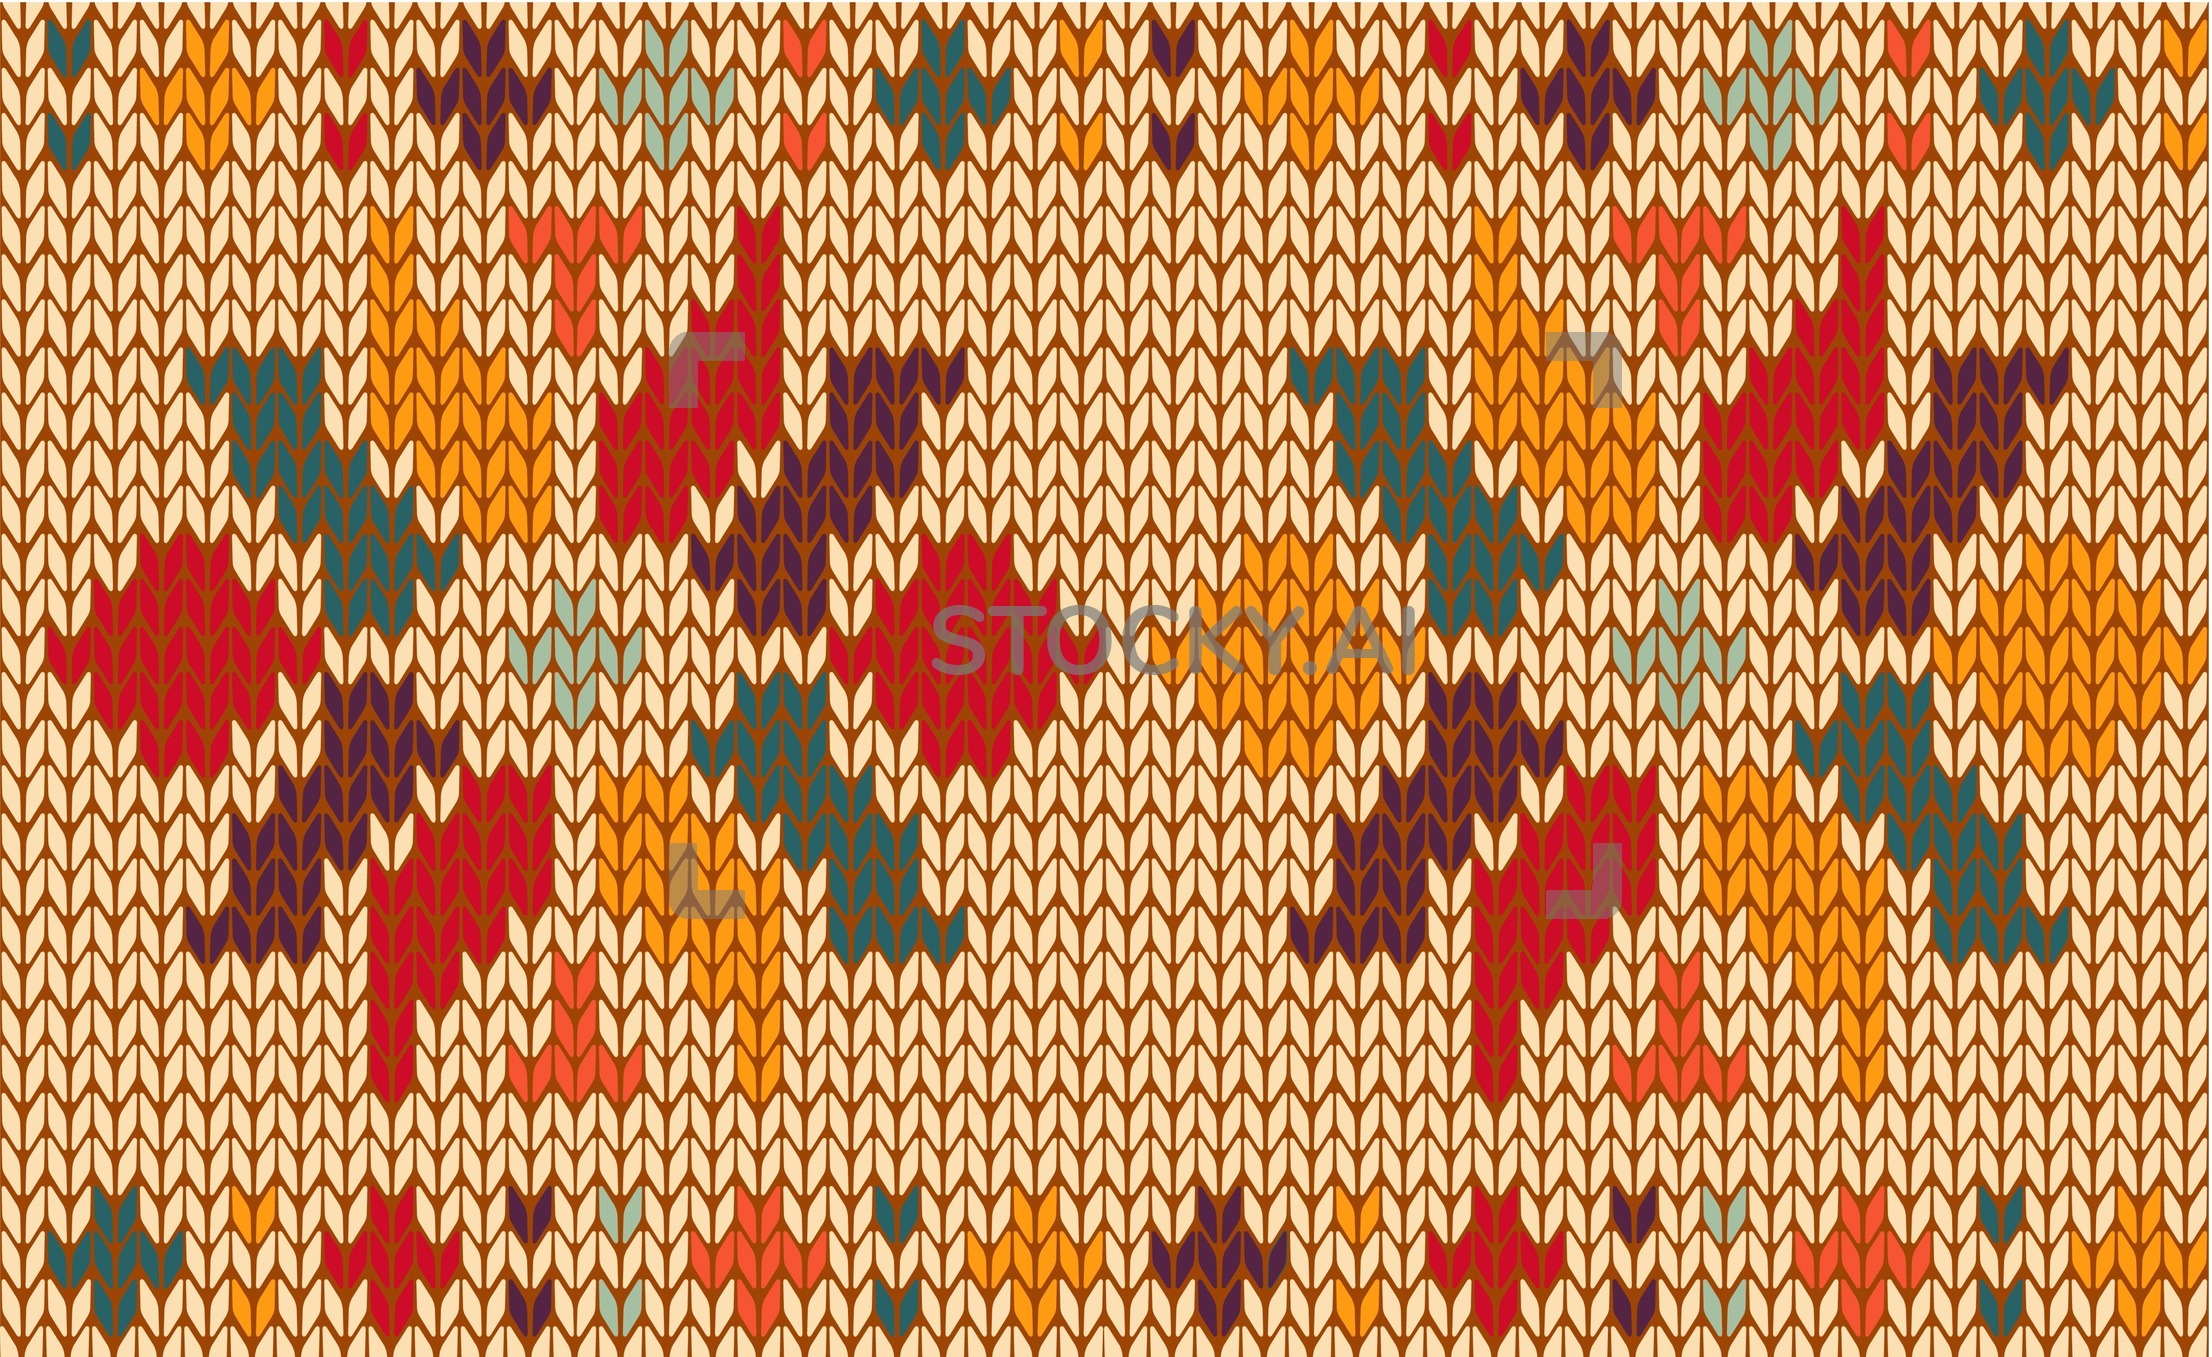 Knitted Pattern Image Of Retro Floral Knitted Pattern Background